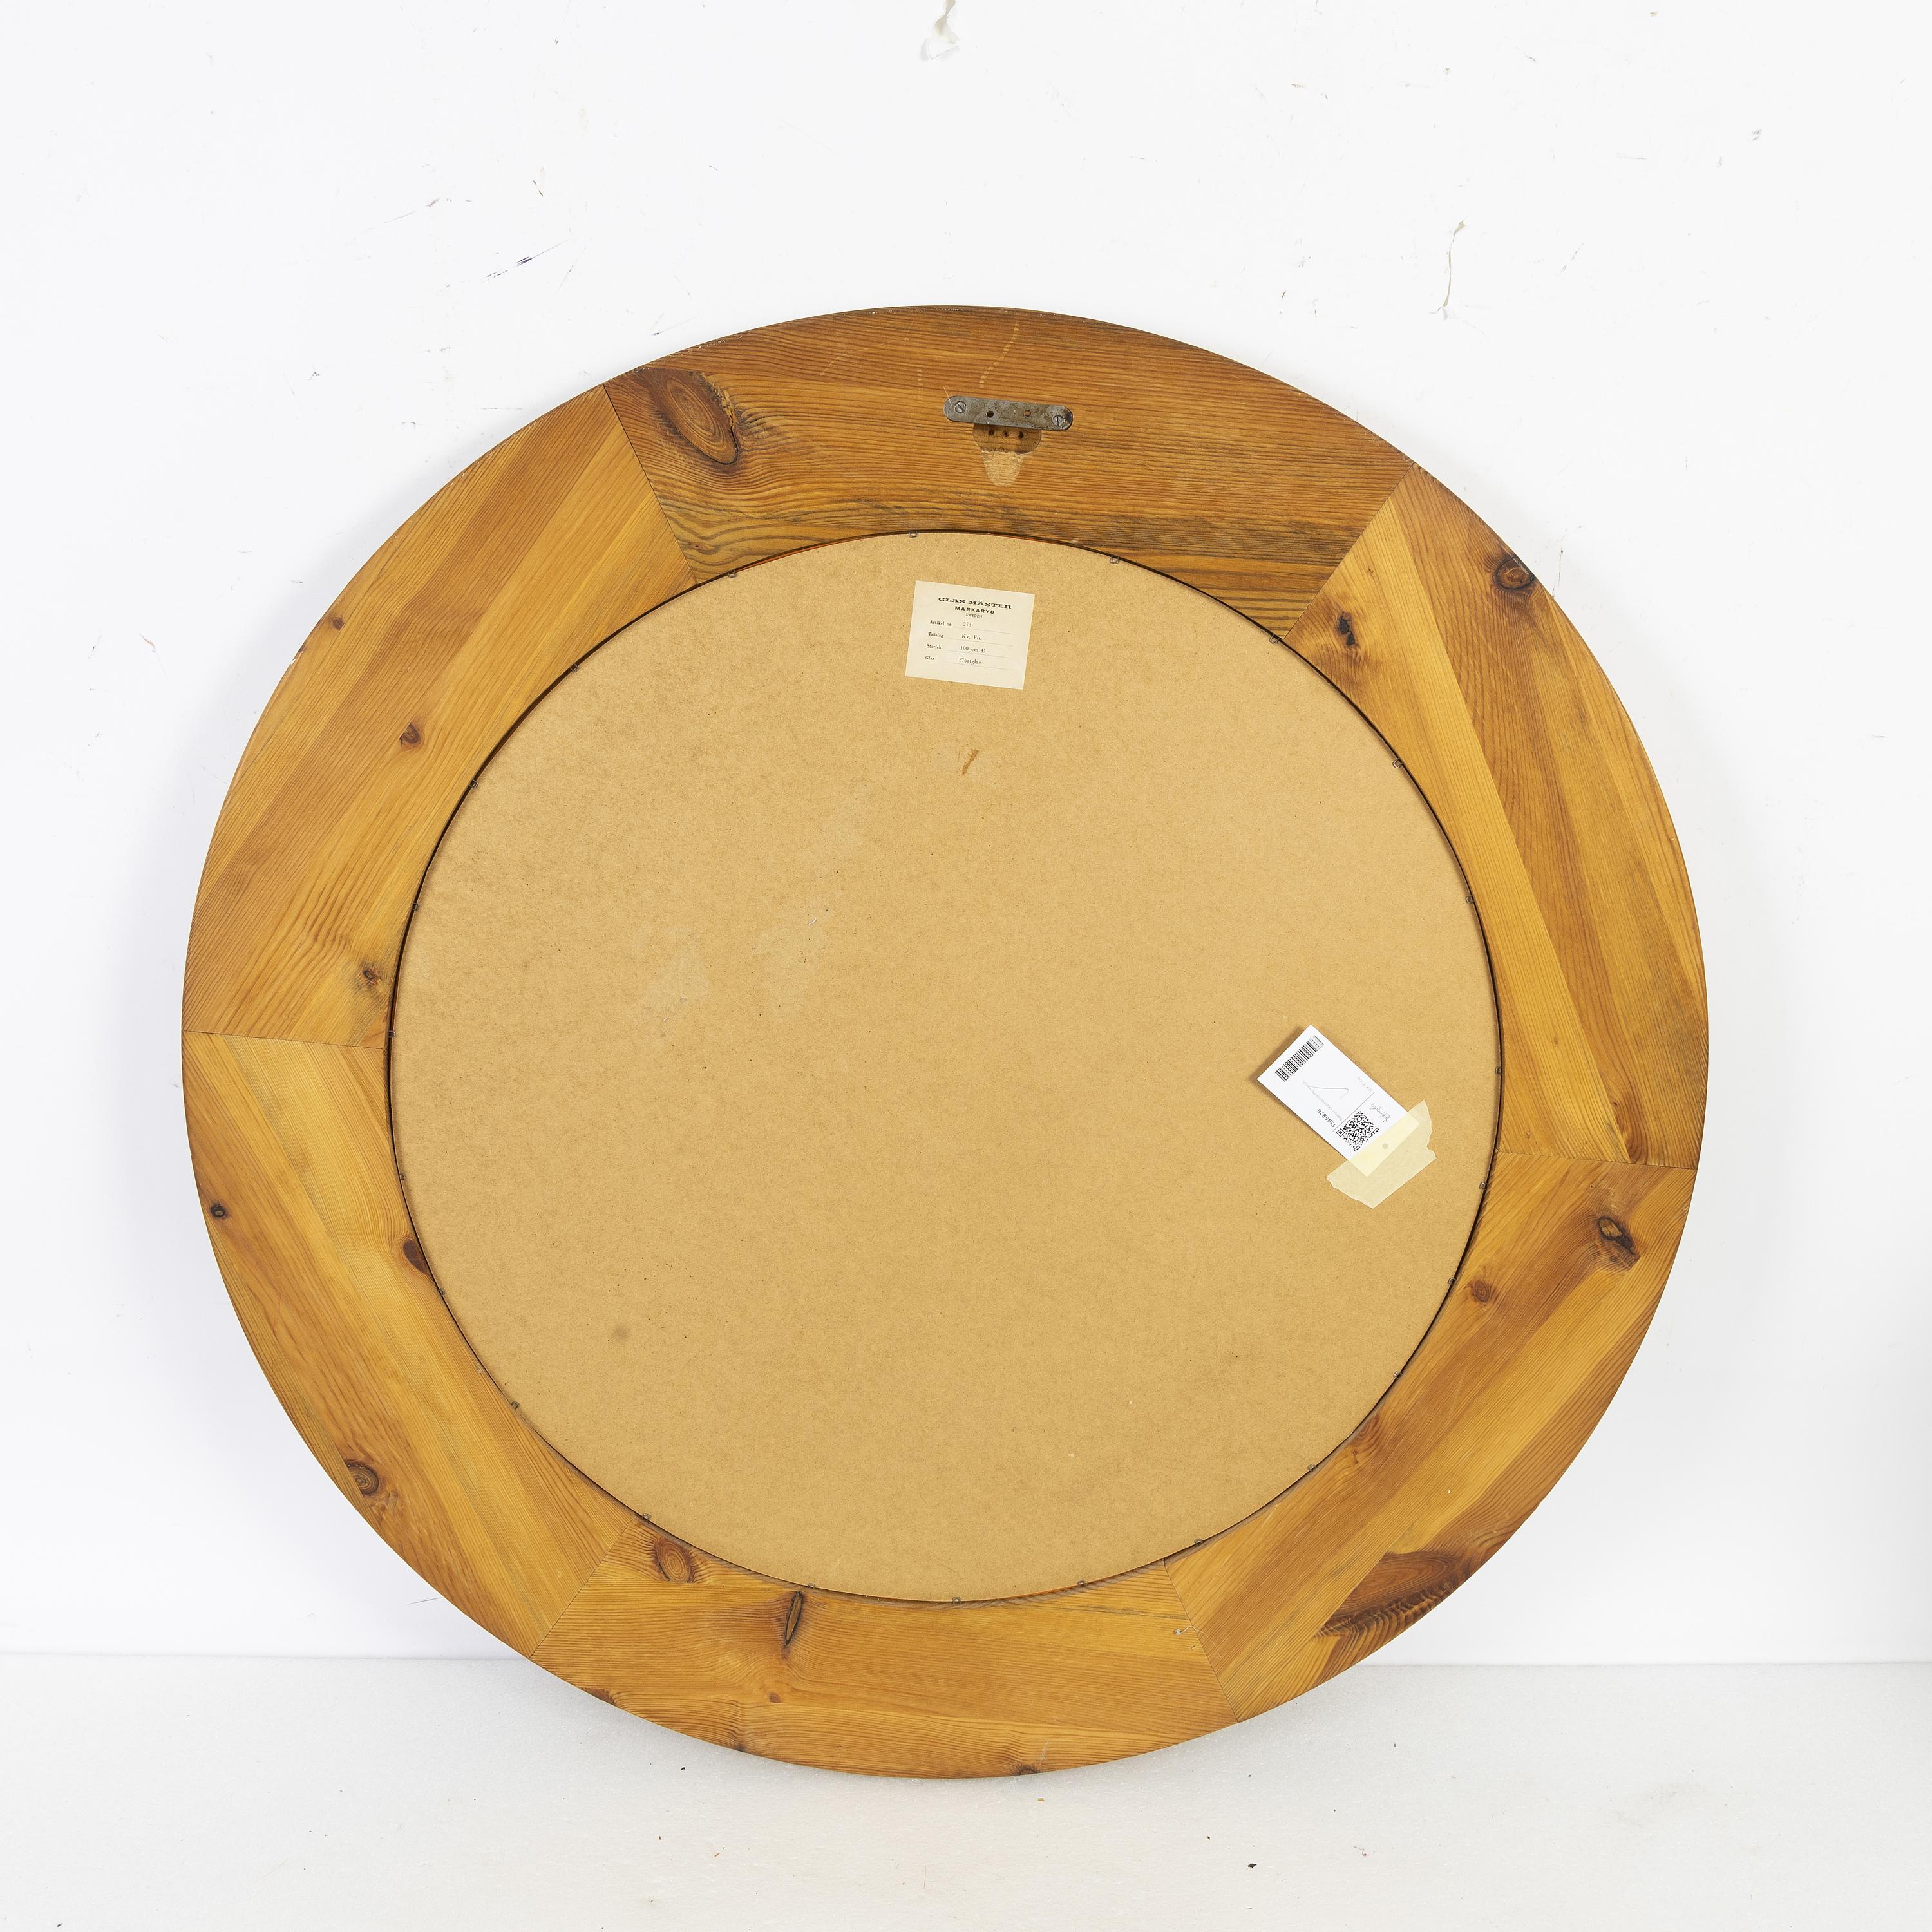 A large ( 100 cm ) round mirror in pine wood made by Glasmaster in Sweden in the 1960s.
Good condition and good craftsmanship.